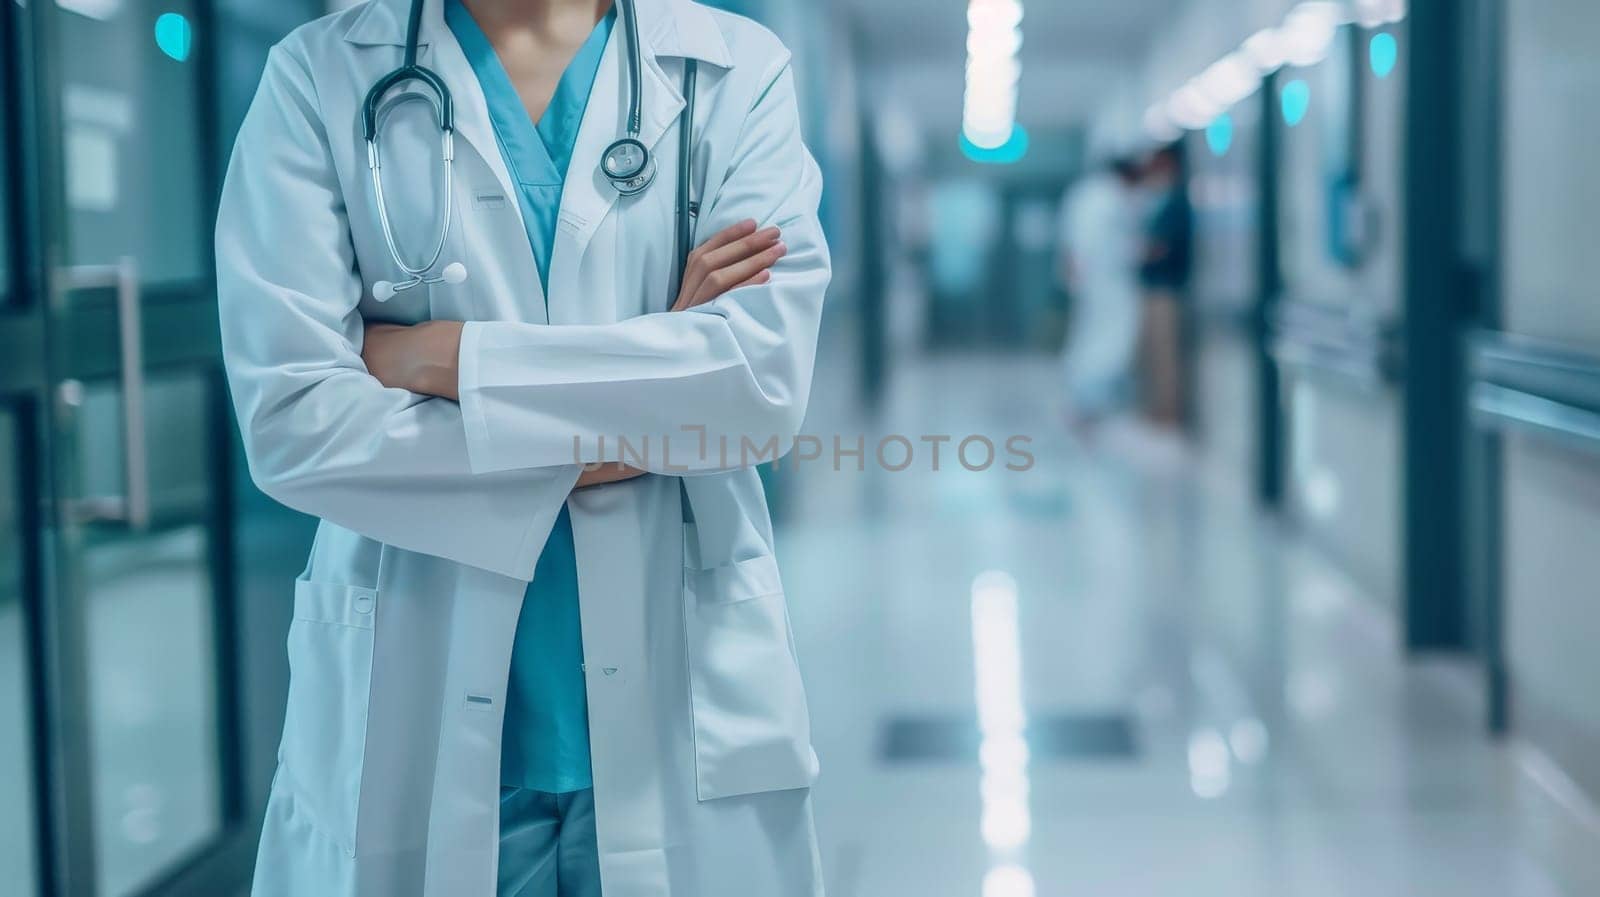 A woman doctor in a white coat stands in a hospital hallway with her arms crossed.